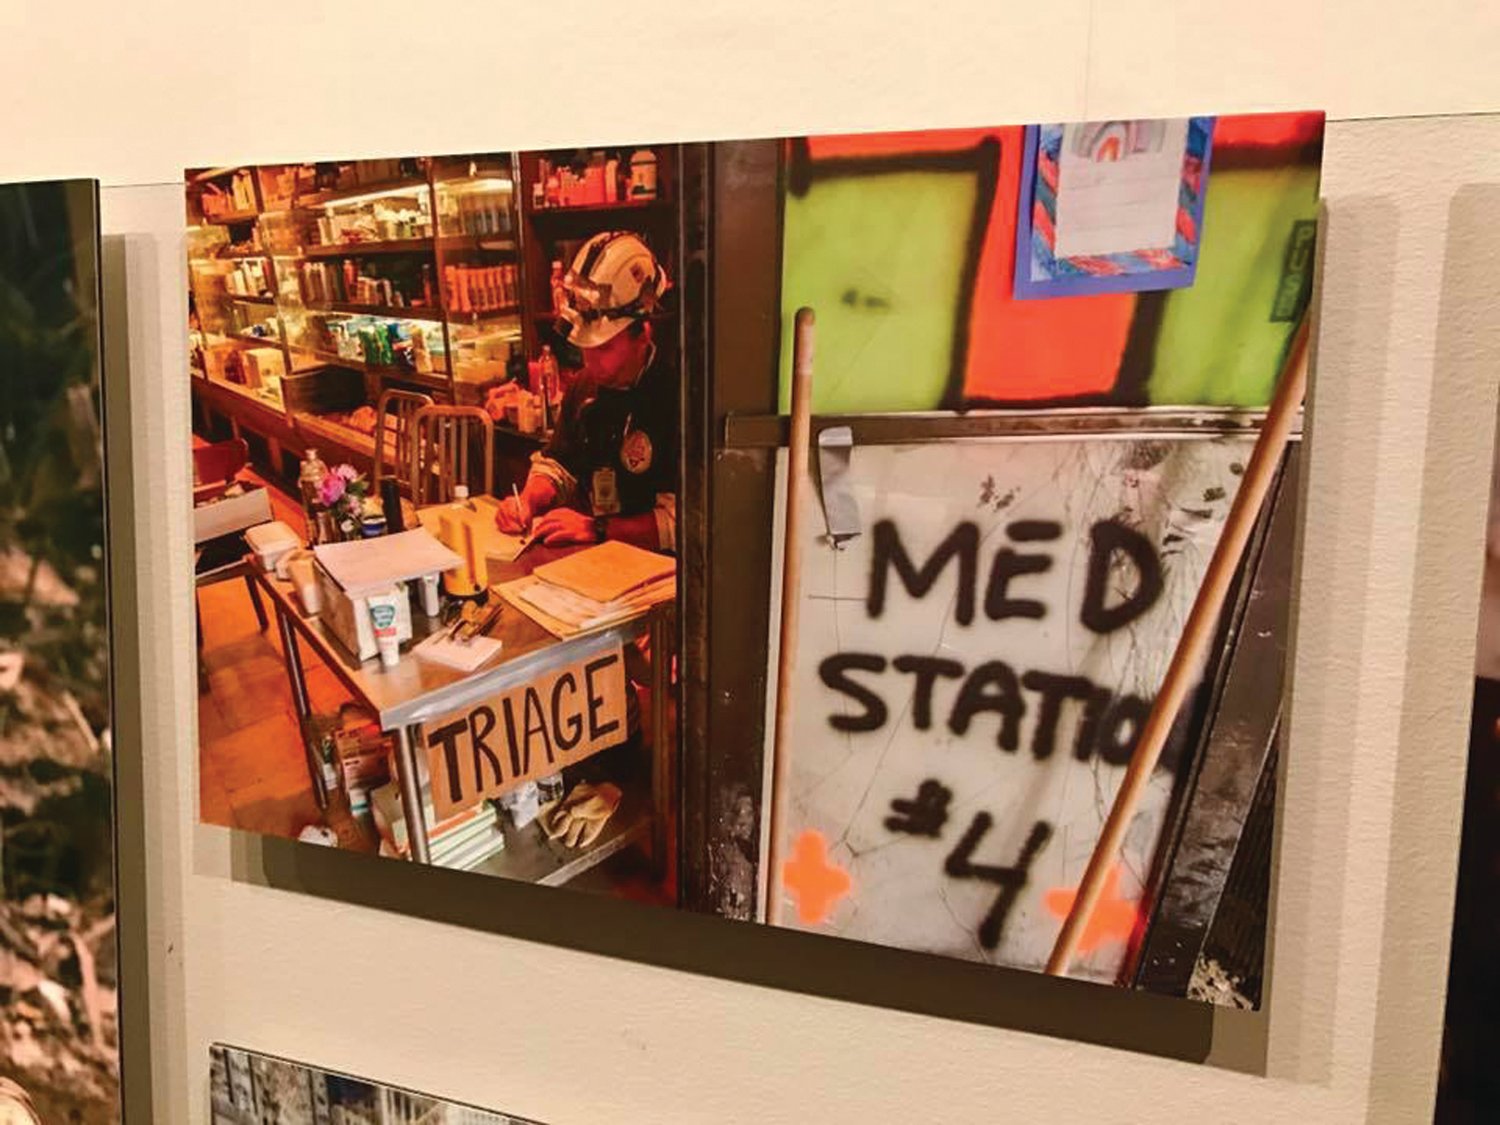 THERE TO HELP: A sign hangs outside Med Station 4, one of several set up around Ground Zero during the 9/11 response. Brooke Lawrence said members of the Rhode Island DMAT were at the site for 16 days, working eight-hour shifts around the clock.